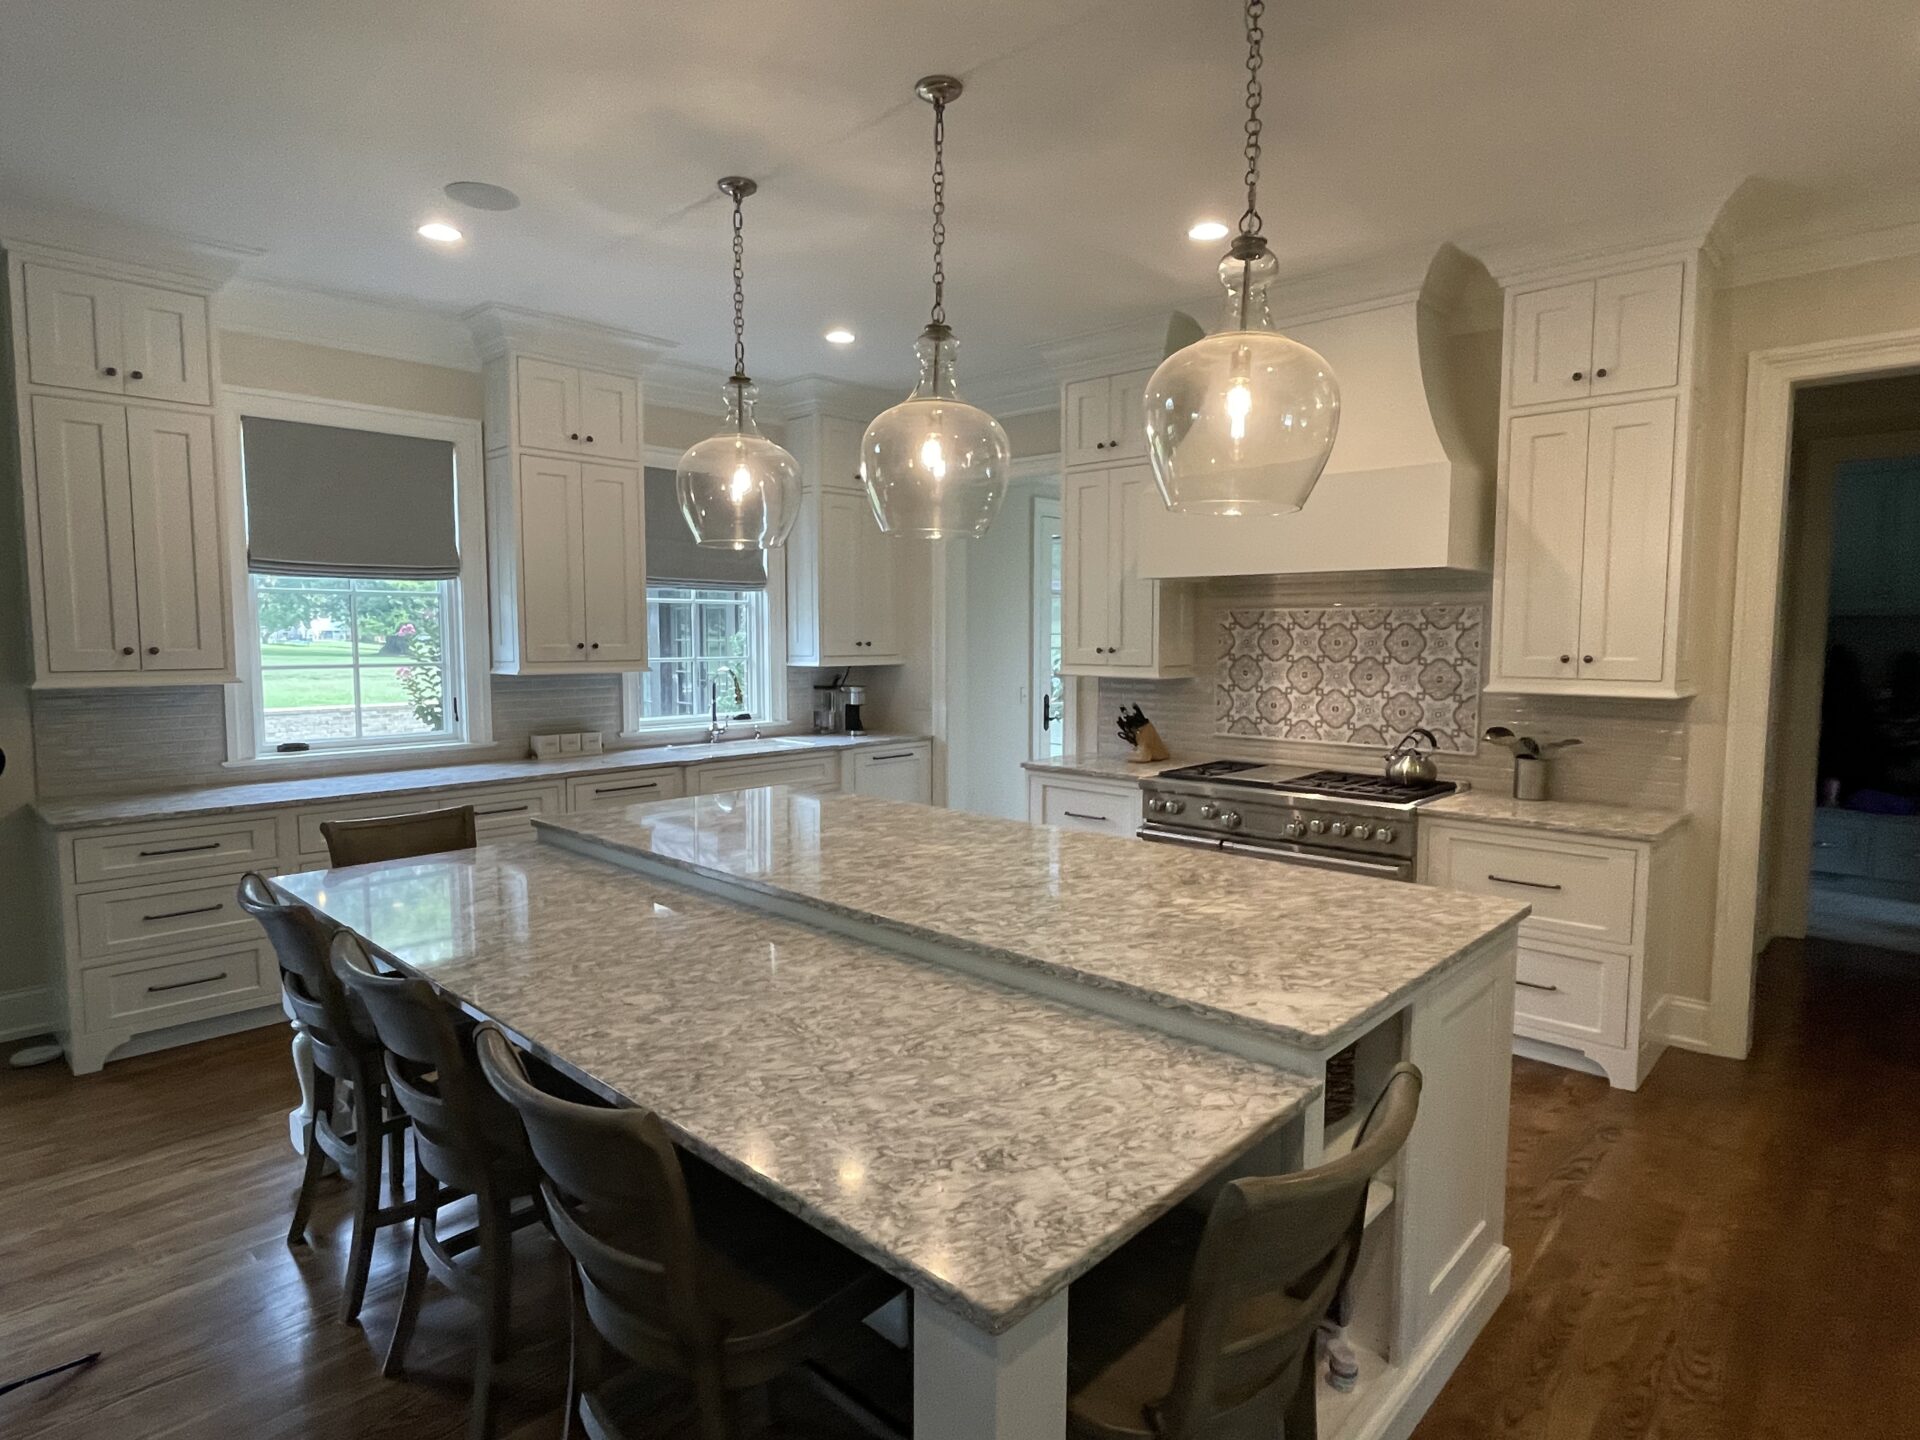 Modern and Sleek granite countertop kitchen island from a Brentwood Home Builder for Home Improvements in Nashville